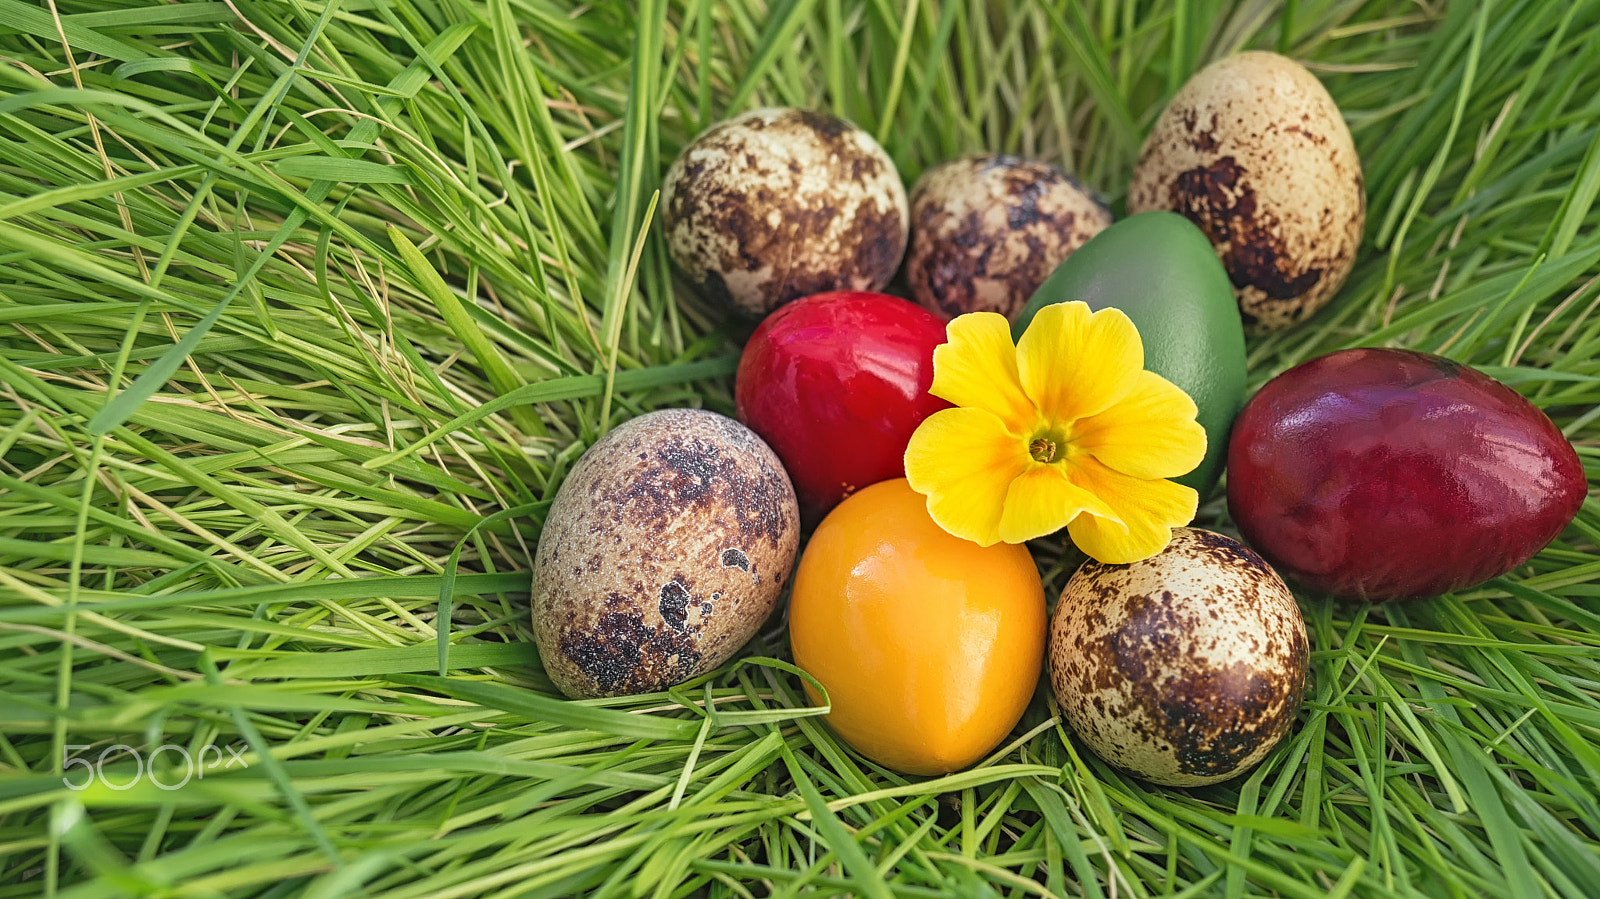 Sony Alpha NEX-6 sample photo. Quail eggs dyed raw easter nest made of grass with a yellow flower primrose photography